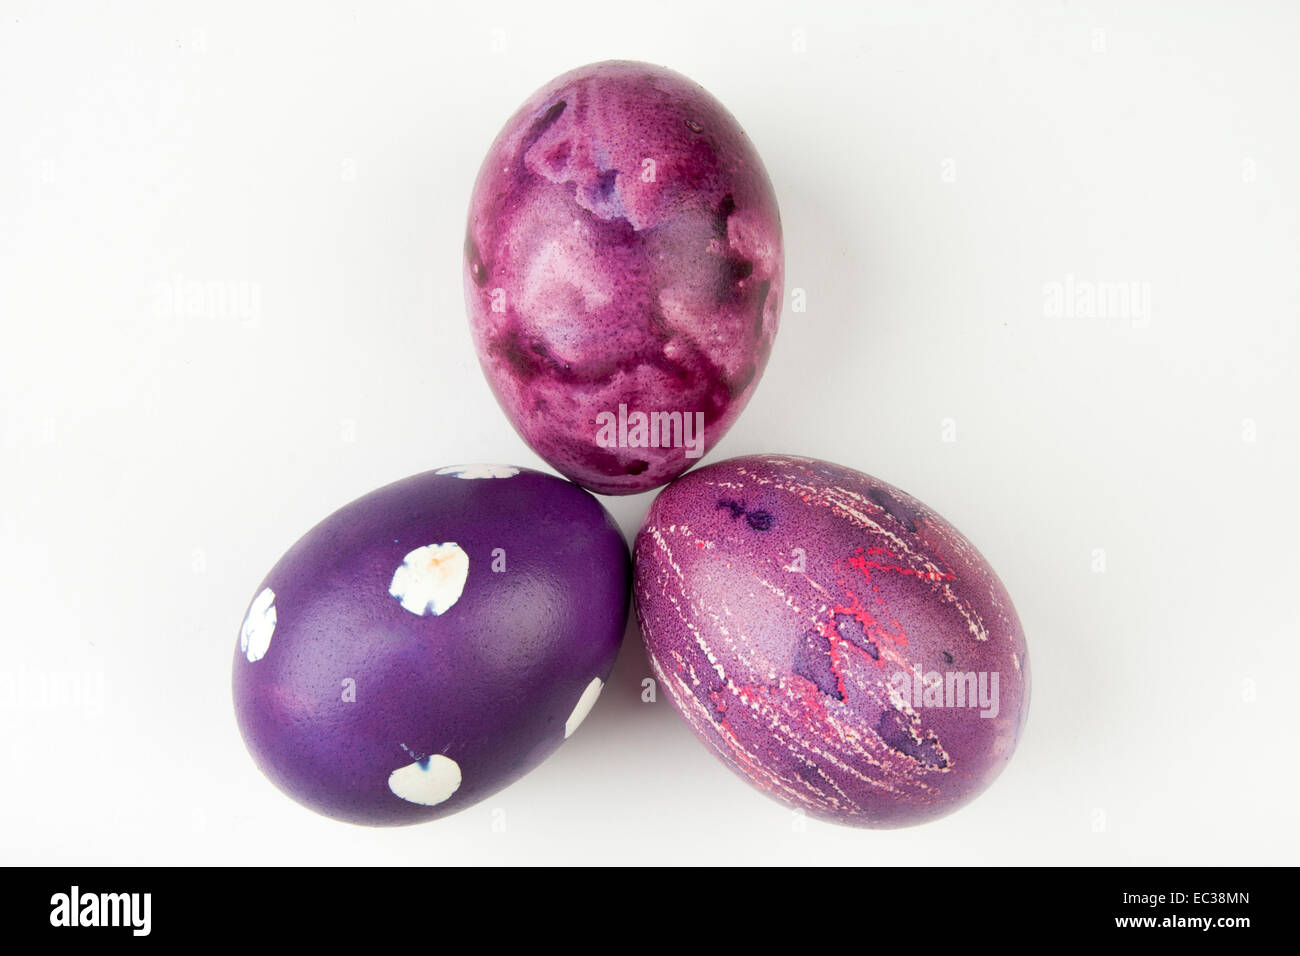 Three Easter eggs in violet colors. Stock Photo